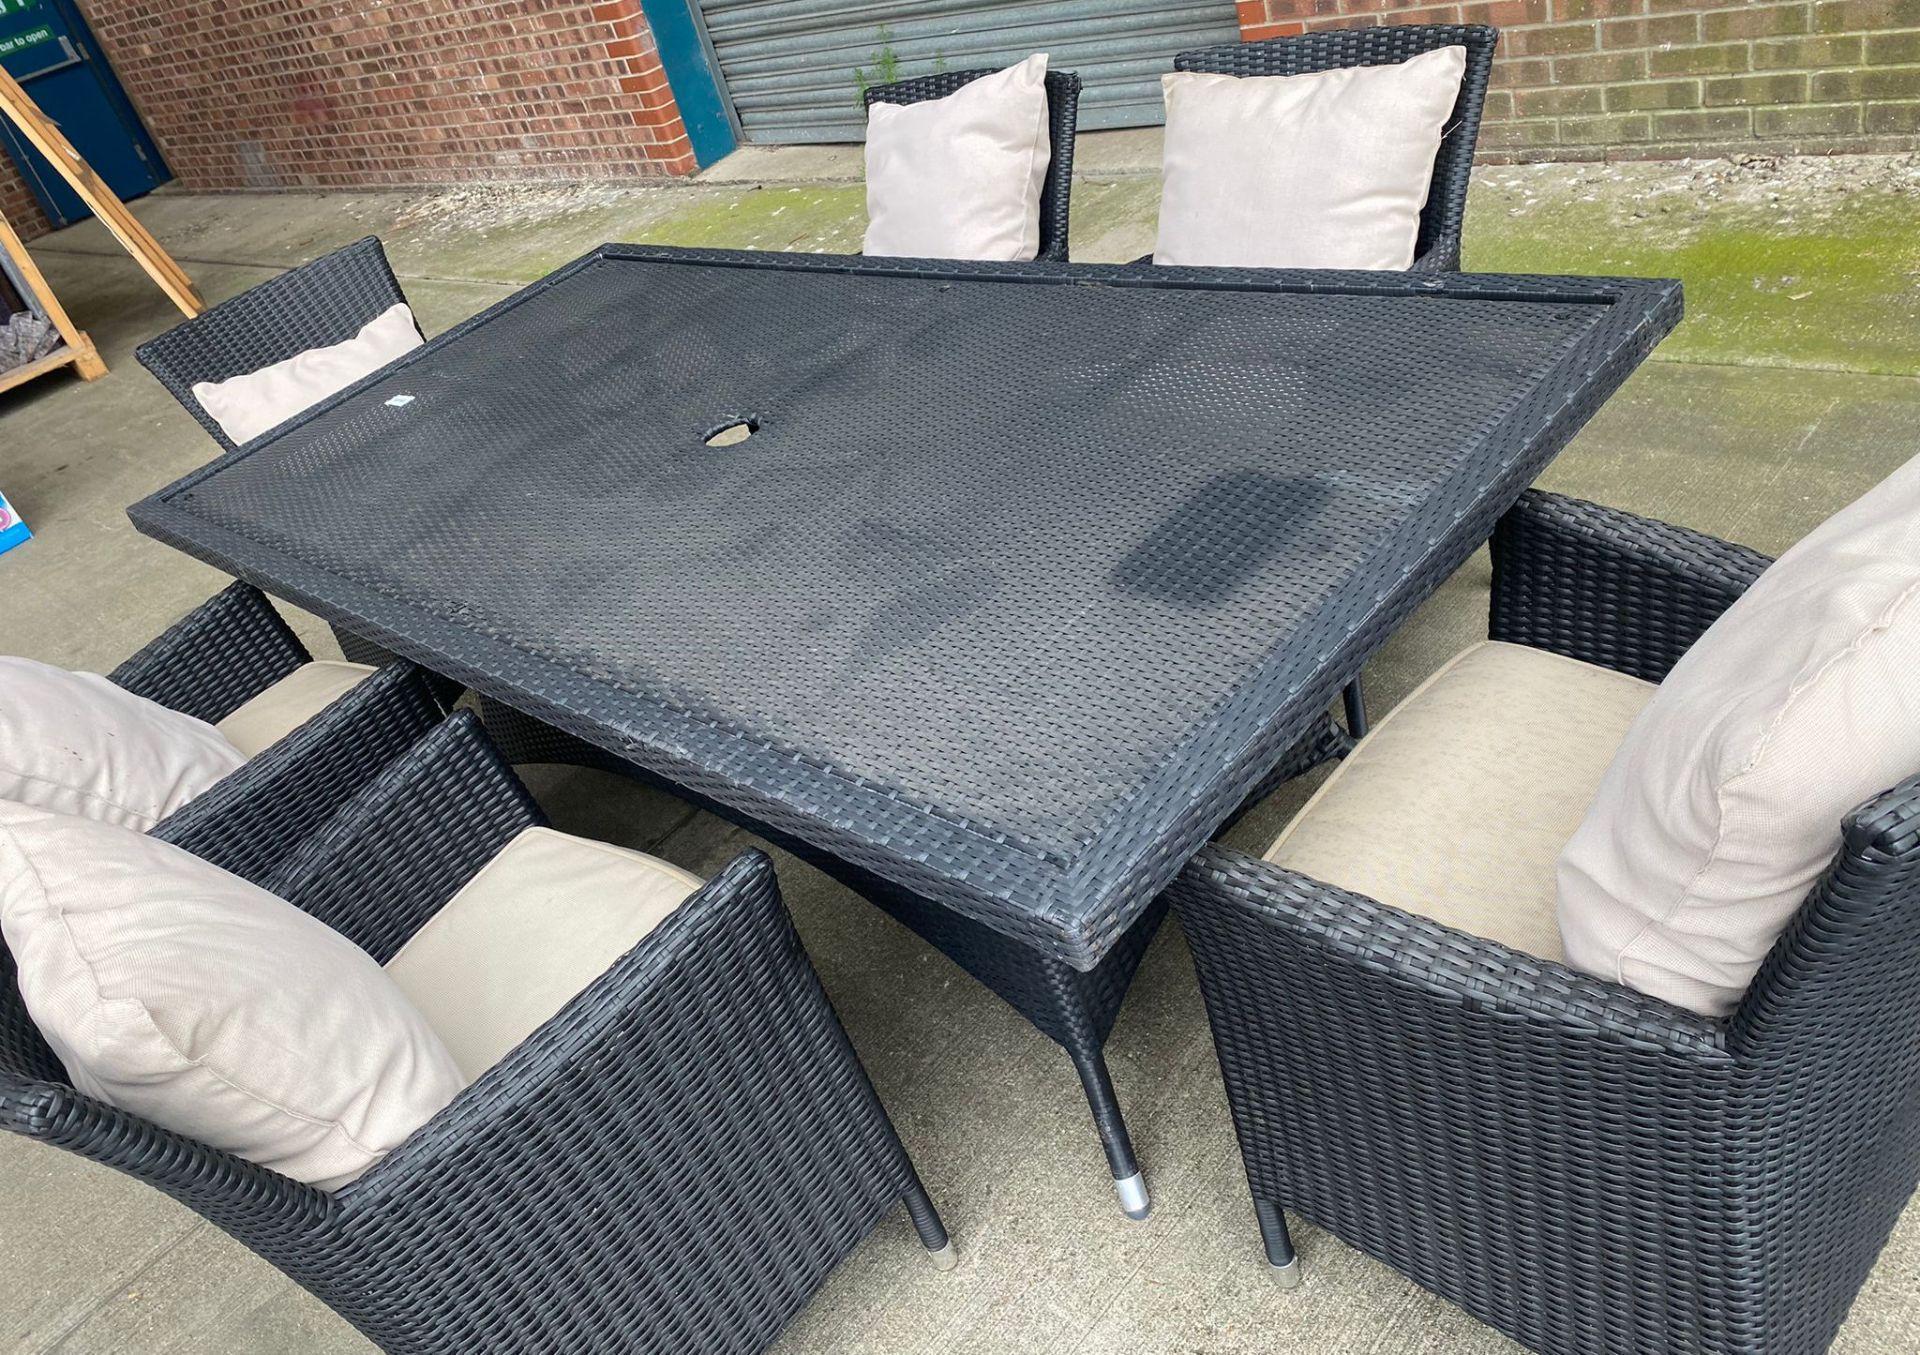 1 x Dark Rattan Outdoor Table With Six Chairs and Cushions